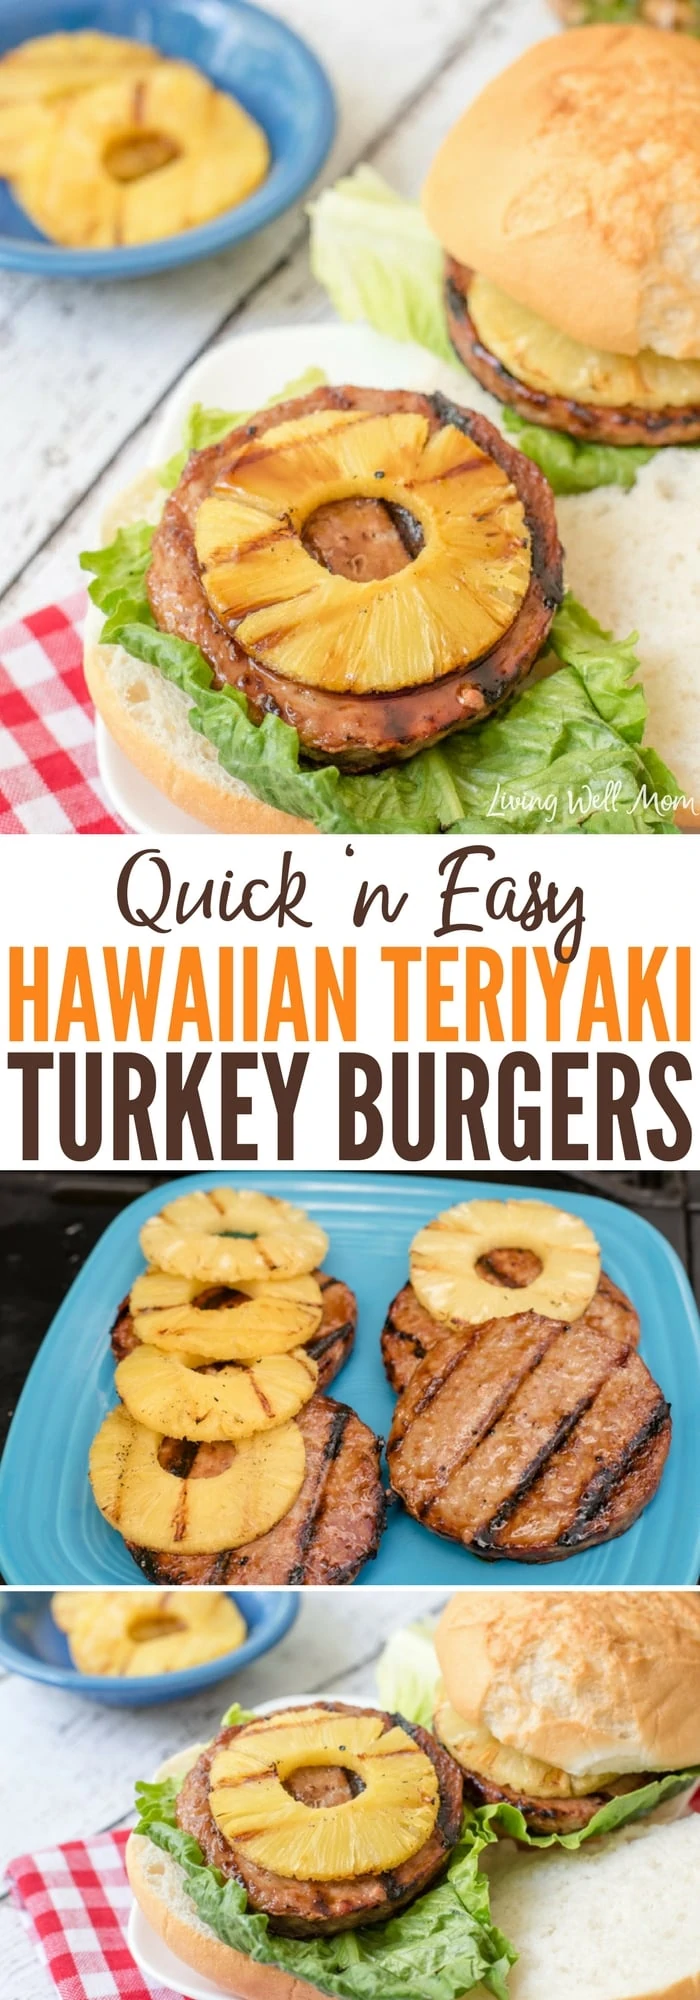 Hawaiian Teriyaki Turkey Burgers are gluten-free and a tasty twist on regular burgers. They’re quick and easy to make and kids love this grilling recipe too!